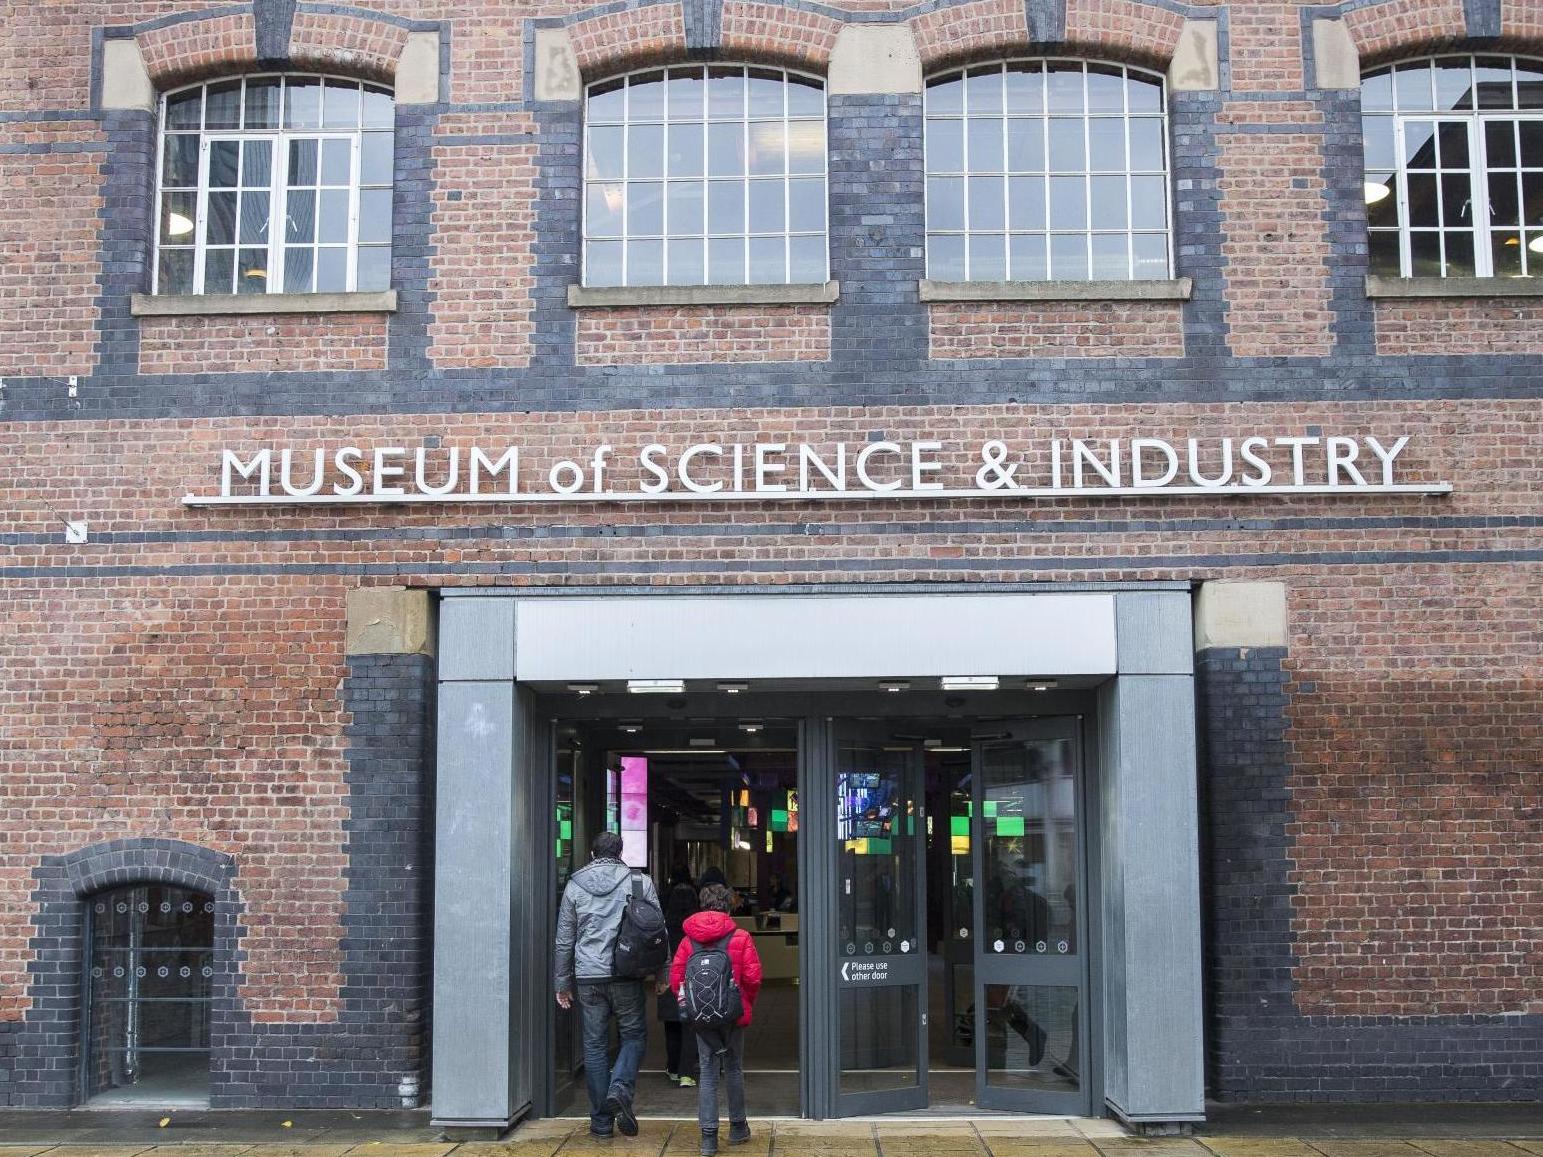 Campaigners say the Manchester Museum of Science and Industry should drop Shell as a sponsor for an upcoming exhibition